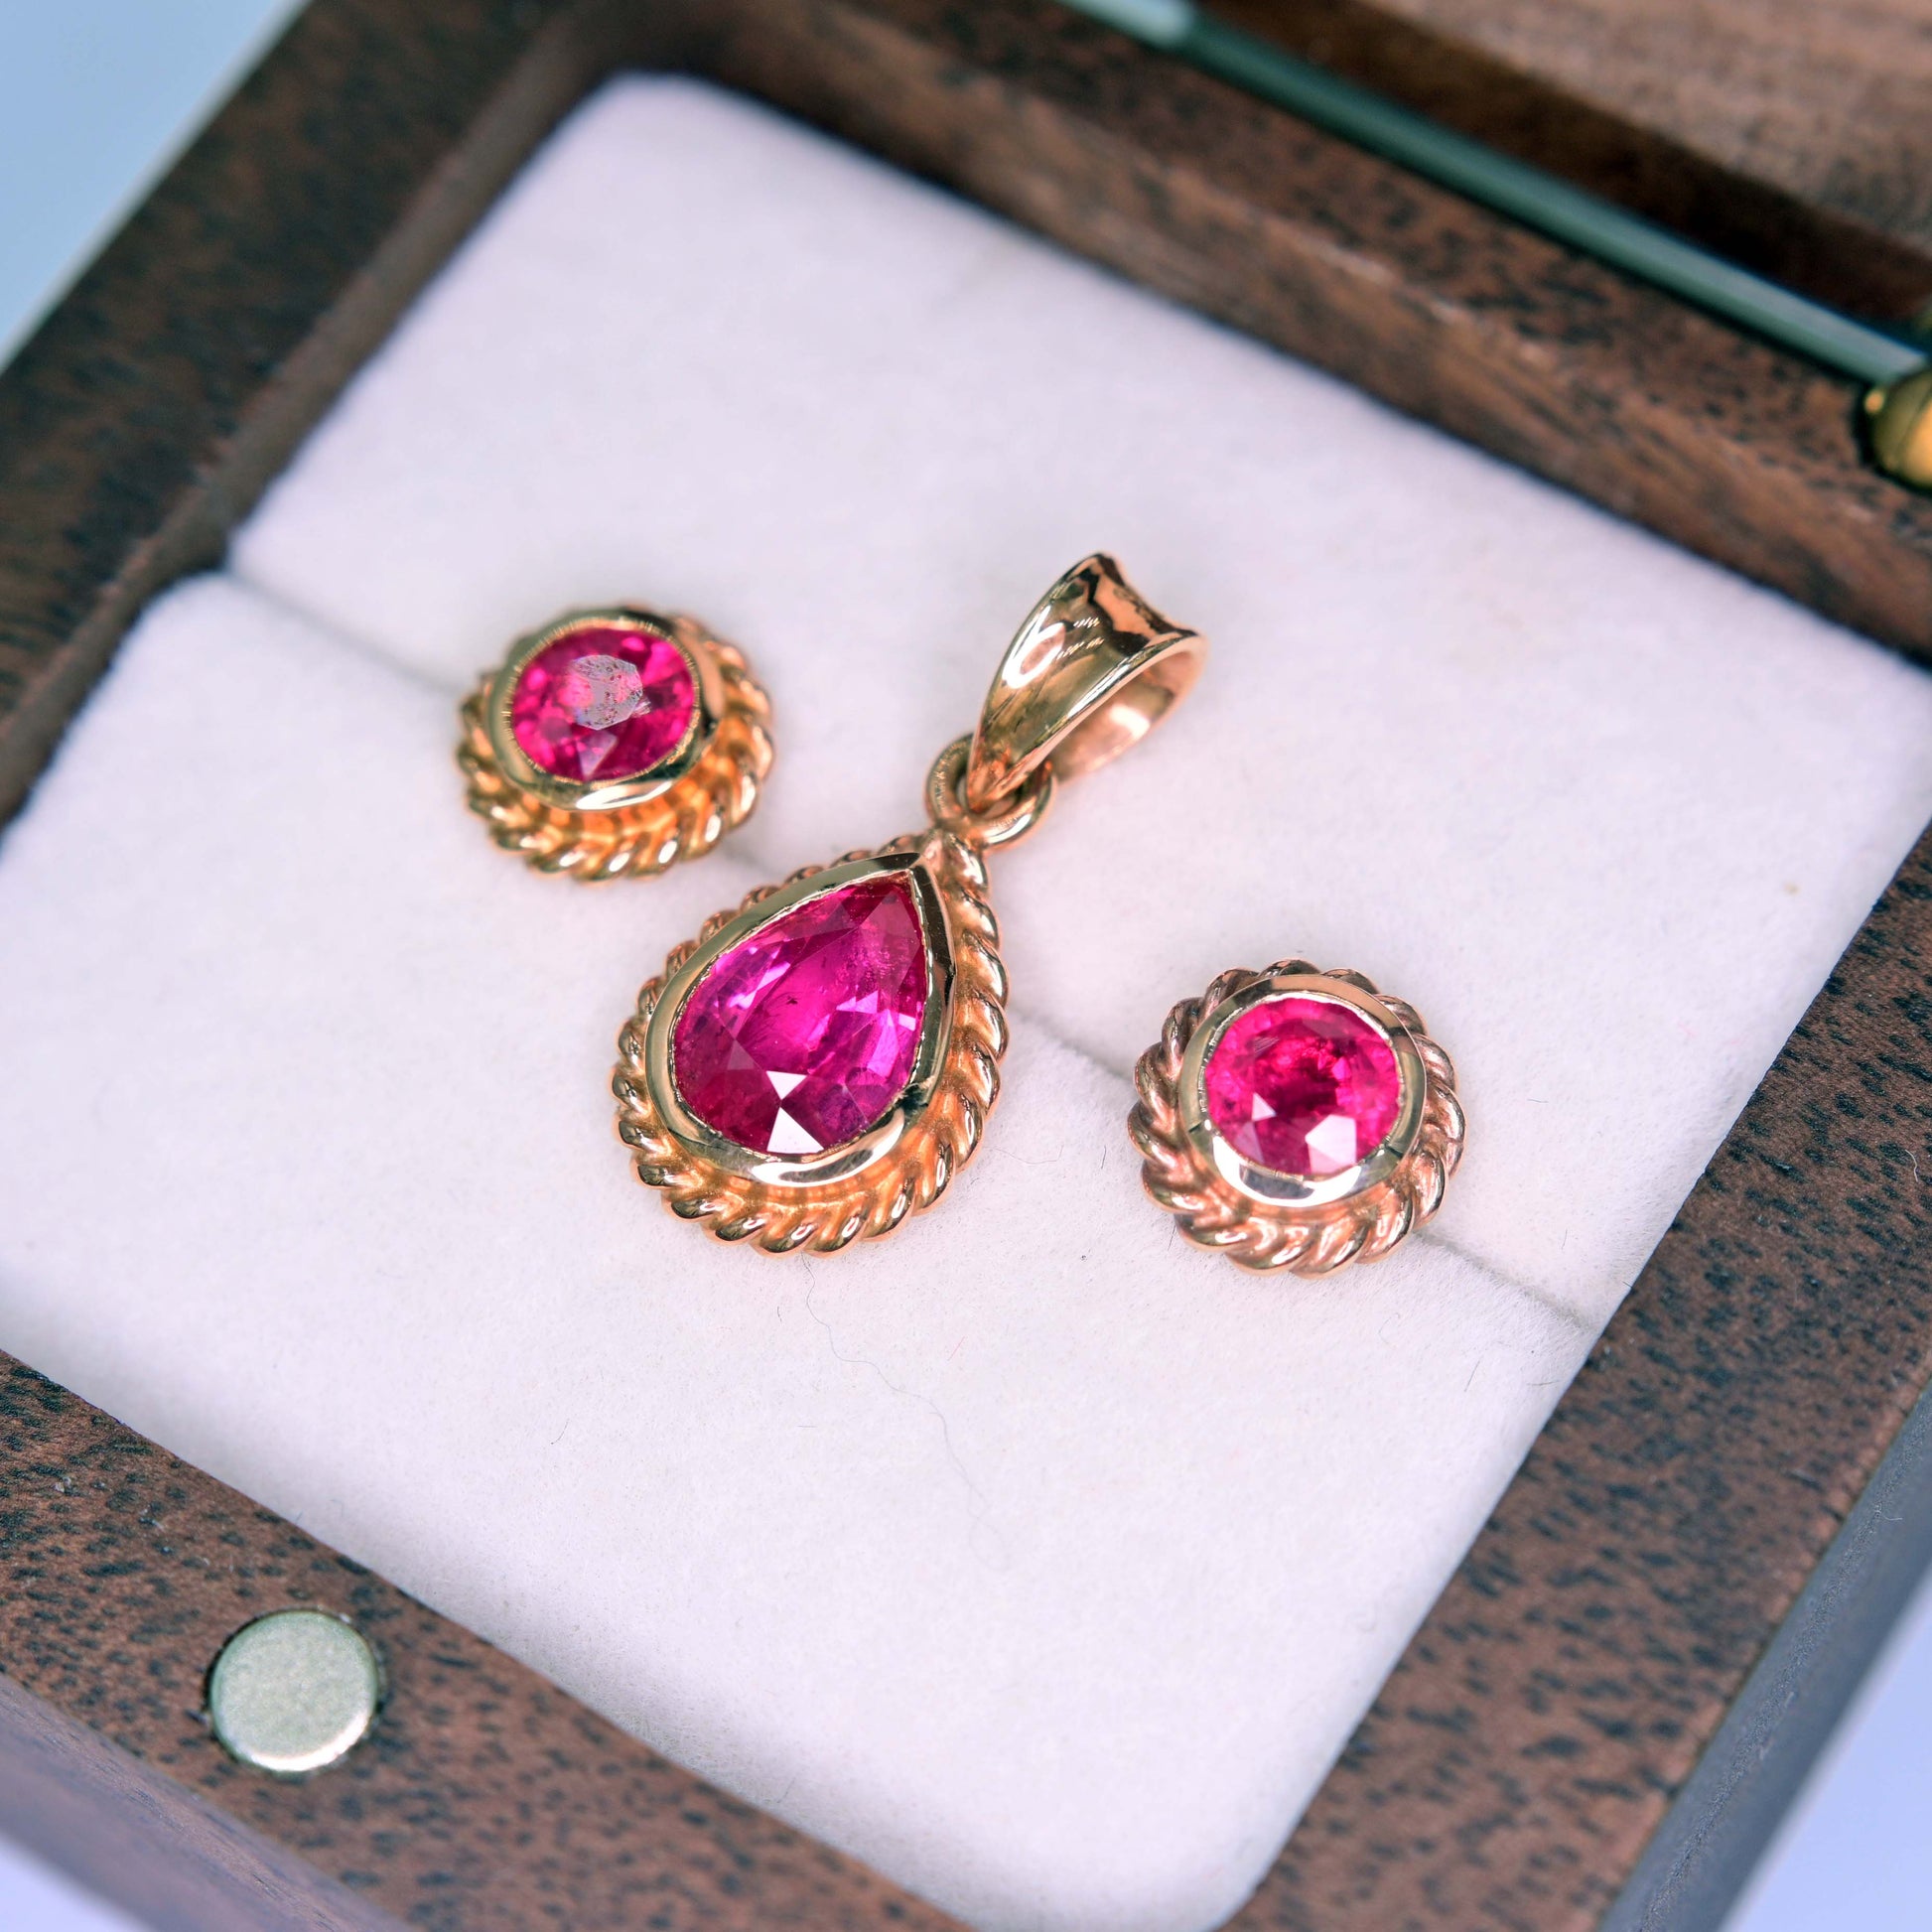 Ruby earrings and pendant set in 14k rose gold